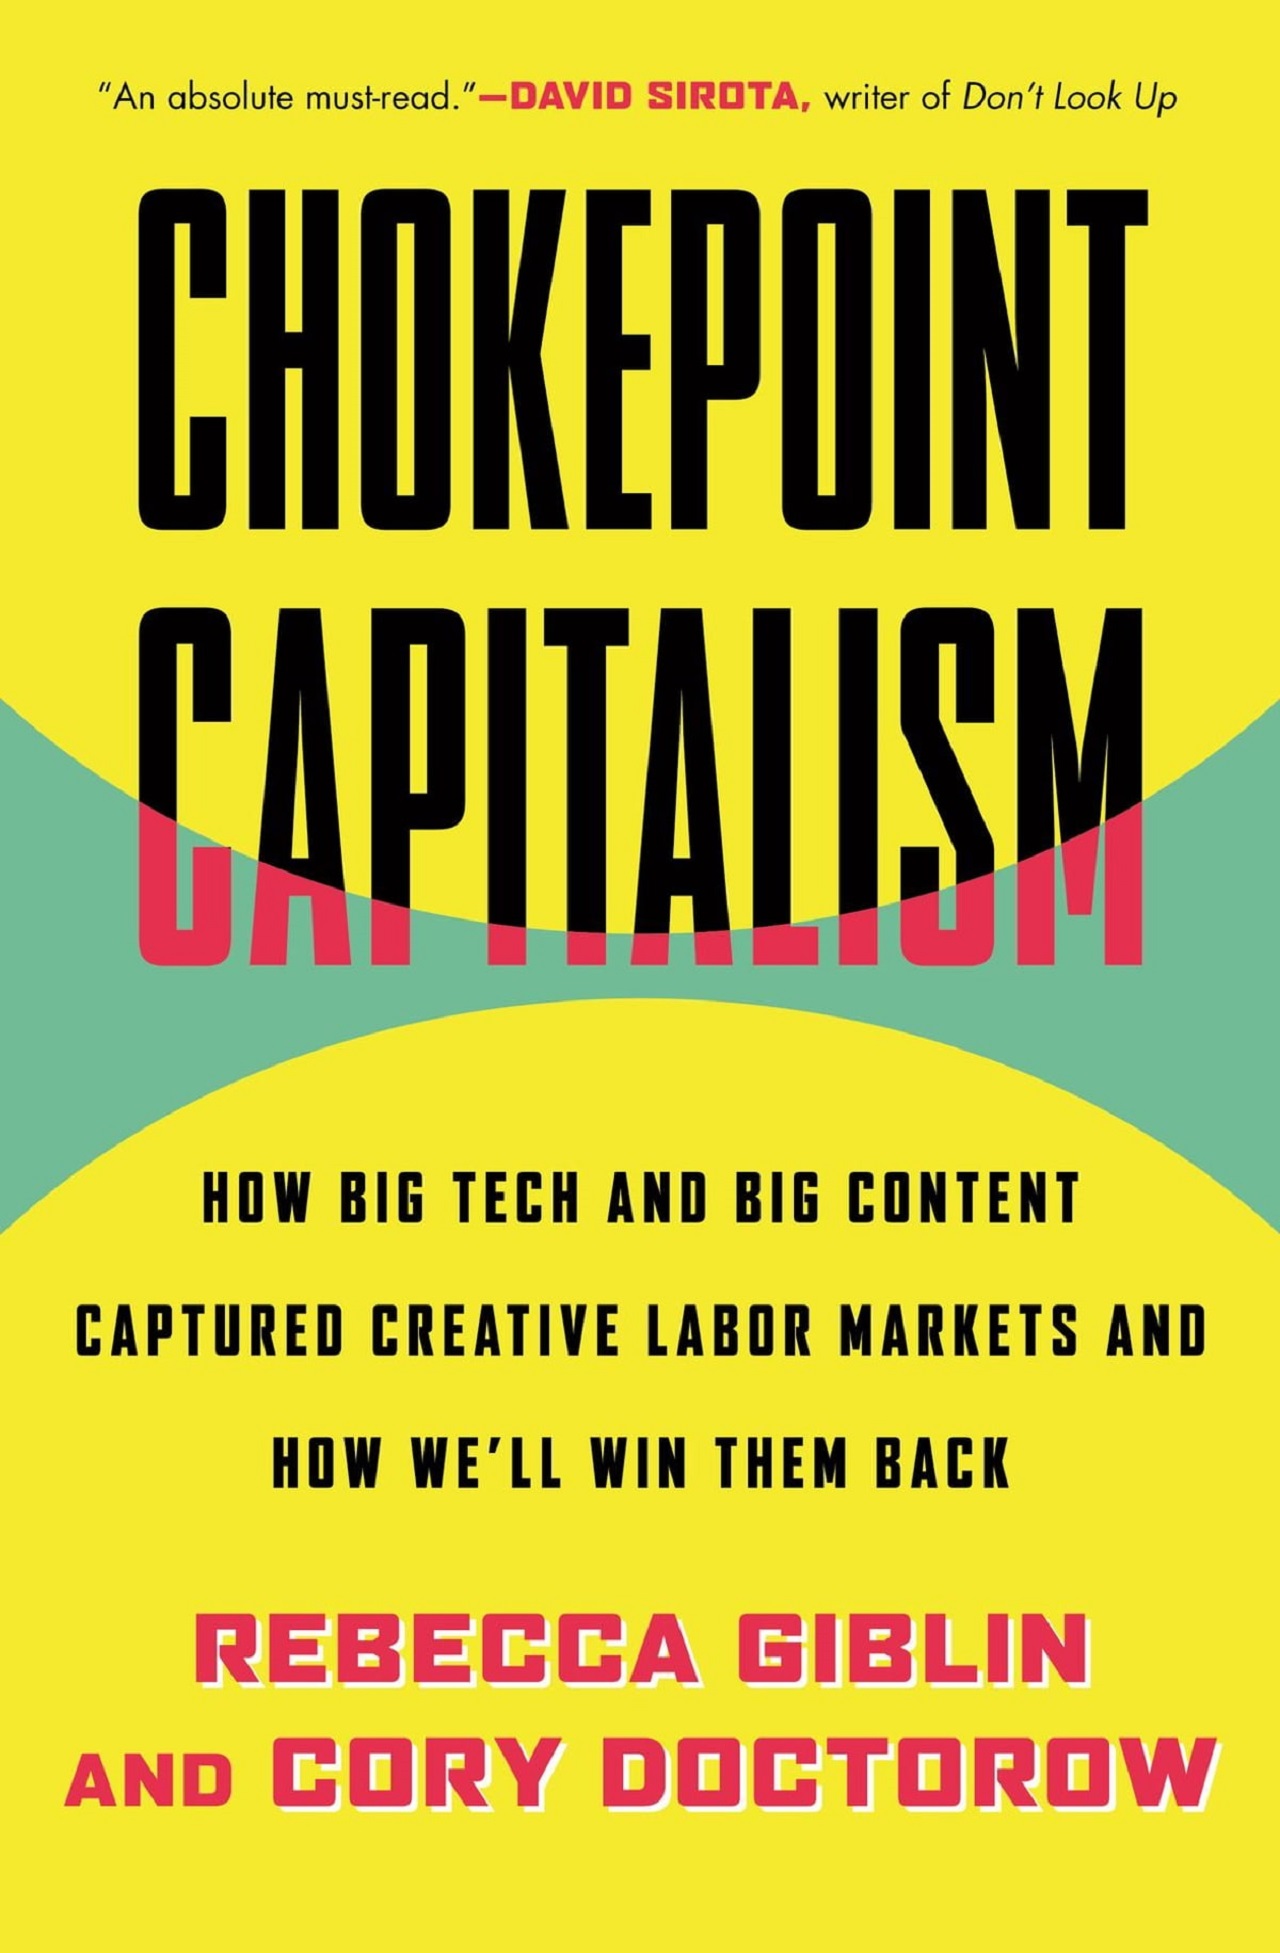 Chokepoint Capitalism Cover, Untertitel "How Big Tech and Big Content Captured Creative Labor Markets and How We'll Win Them Back"